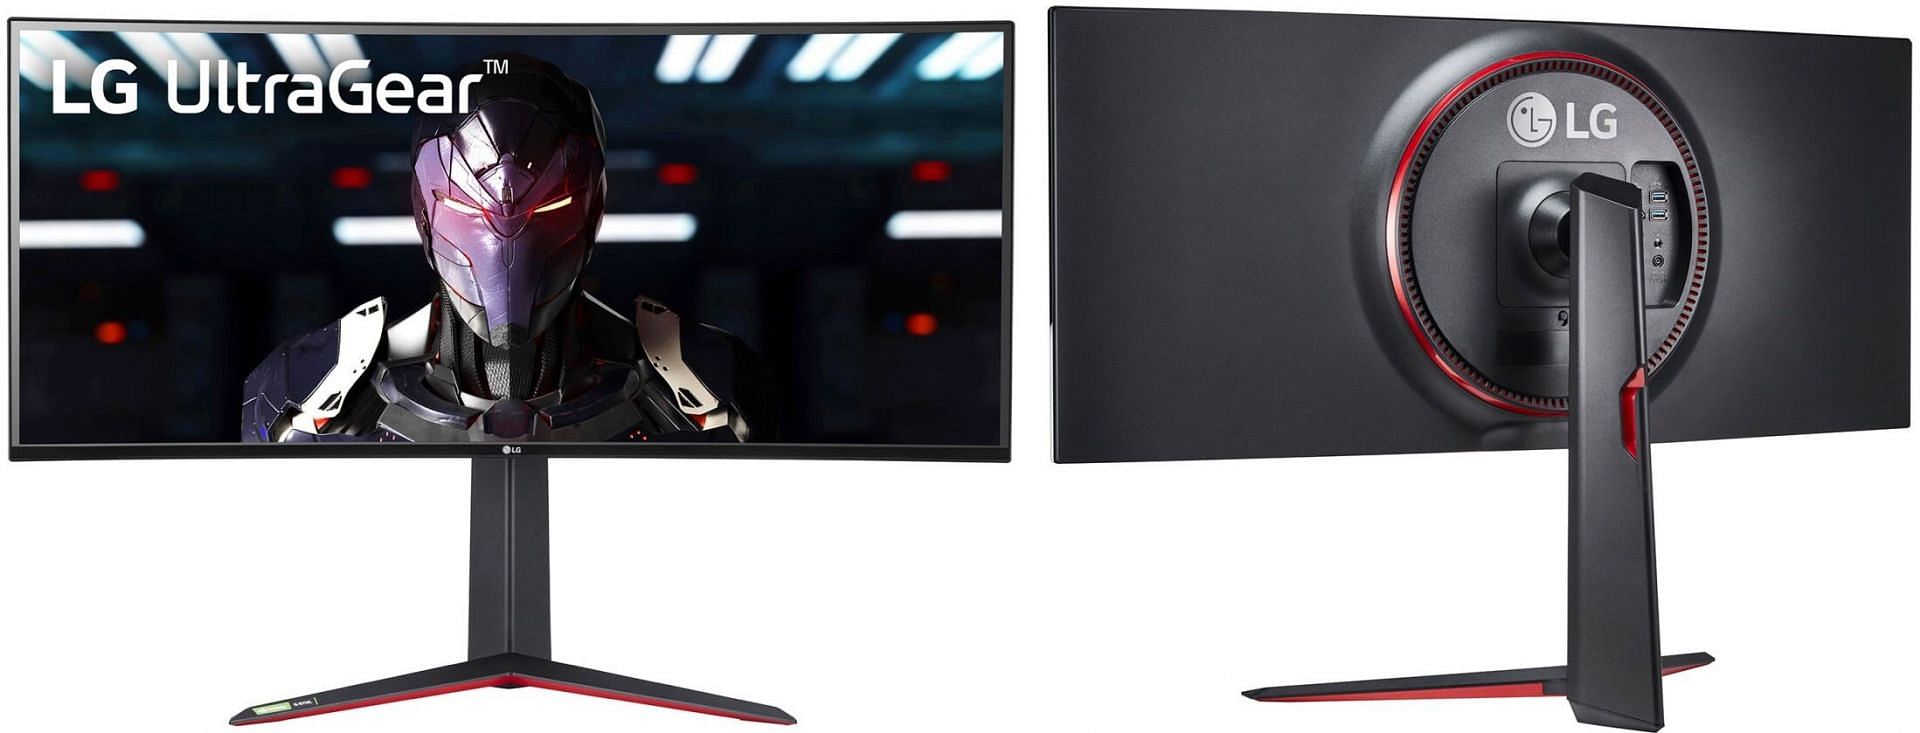 Best ultrawide curved monitor at this price (Image via LG)